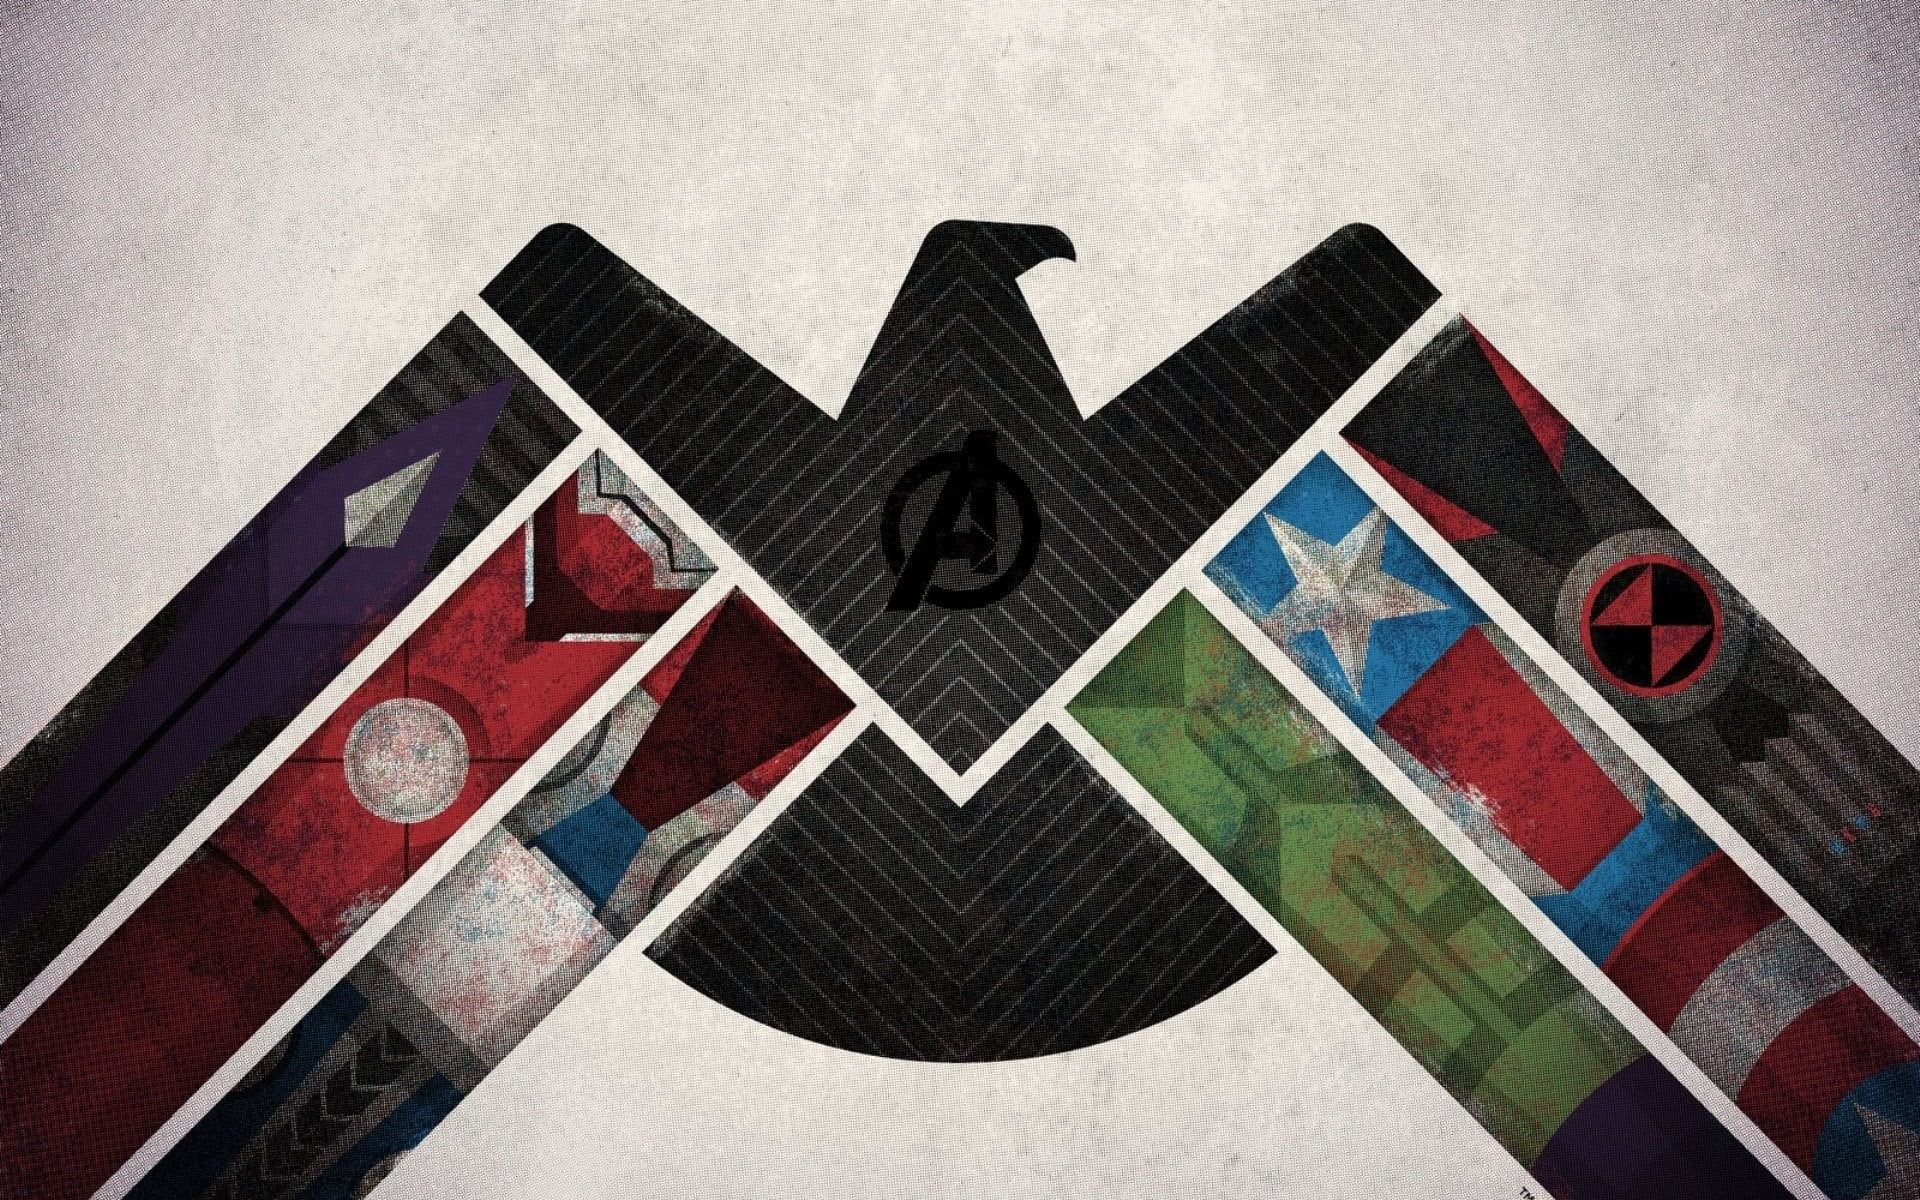 Avengers logo with different colored stripes - Marvel, Thor, Avengers